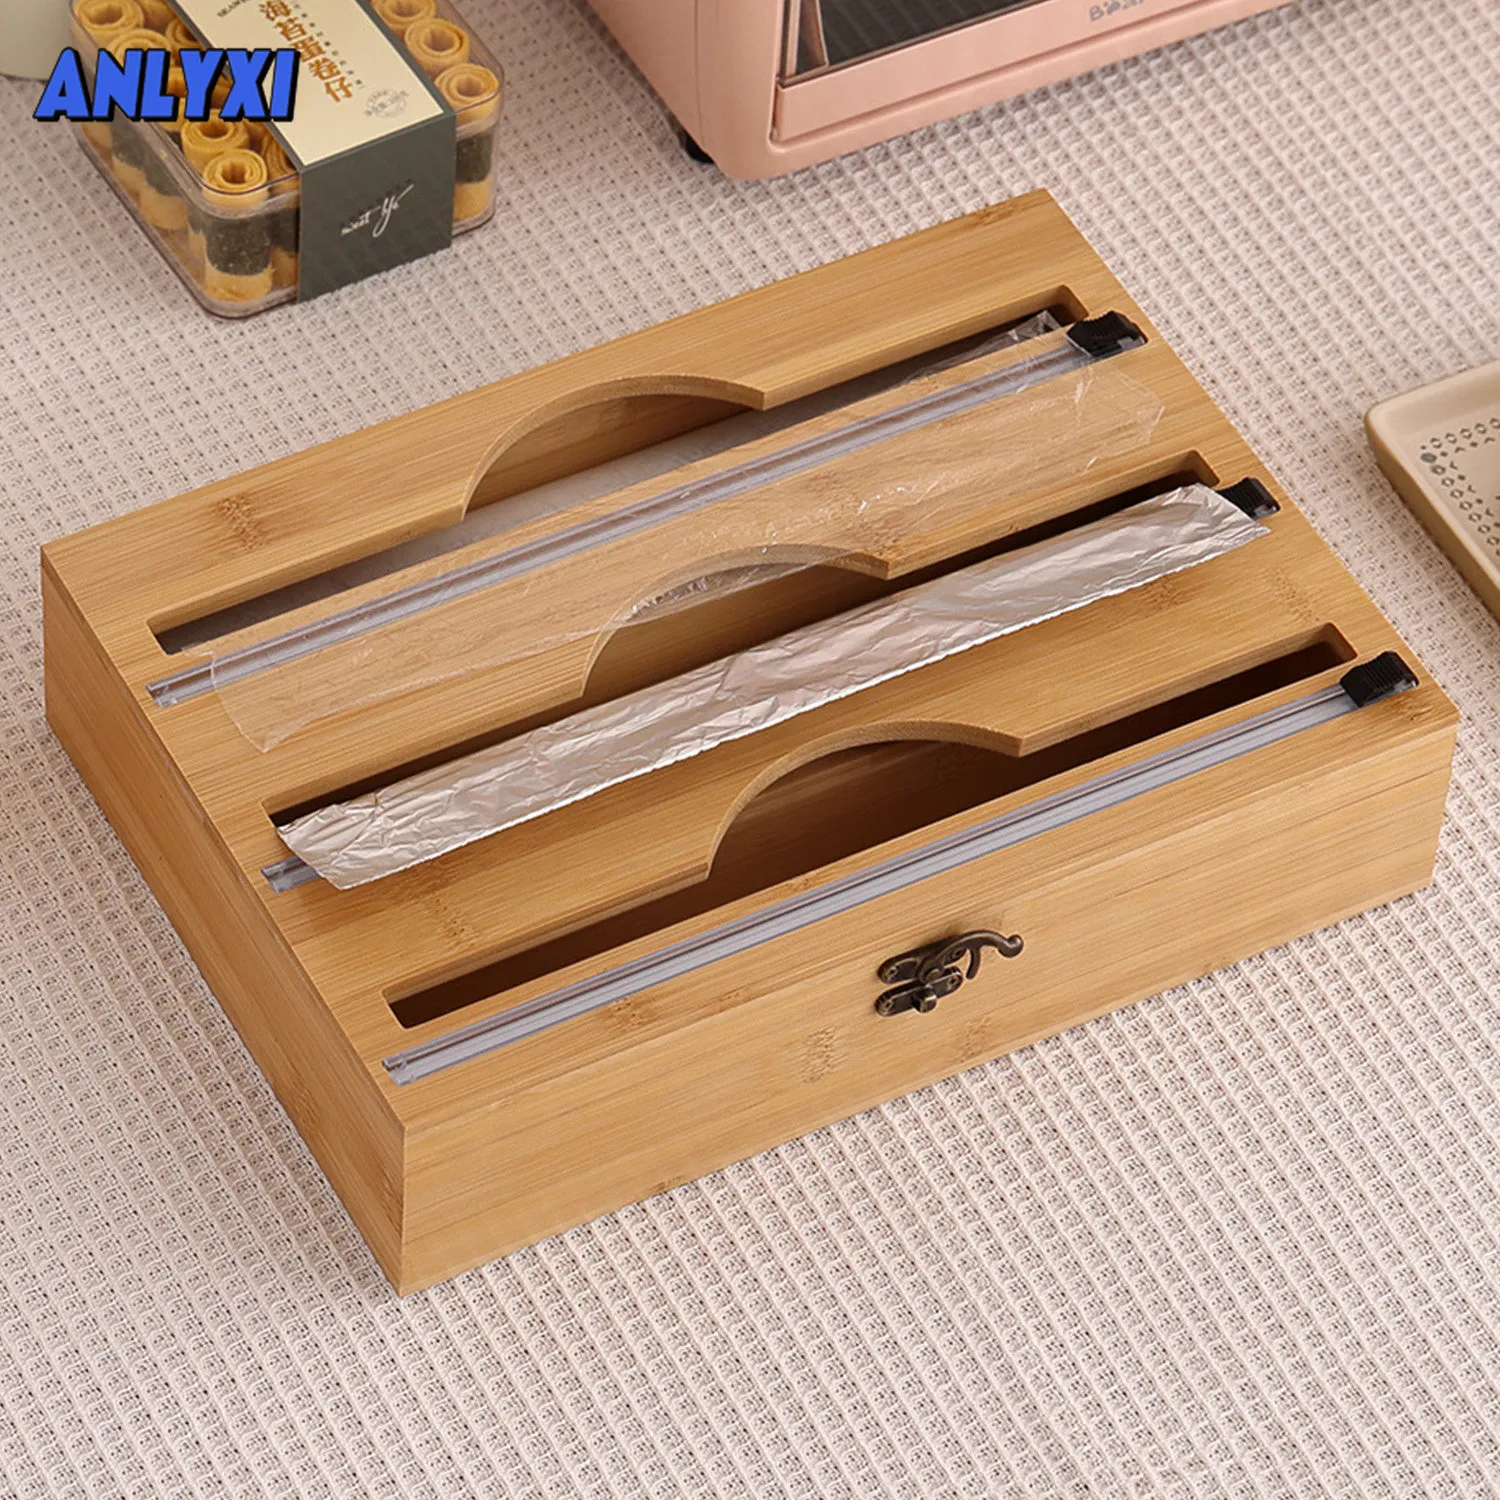 Other Kitchen Tools 3 In 1 Bamboo Wrap Dispenser Storage for Aluminum Foil with Cutter Cling Film Holder Accessories 230710